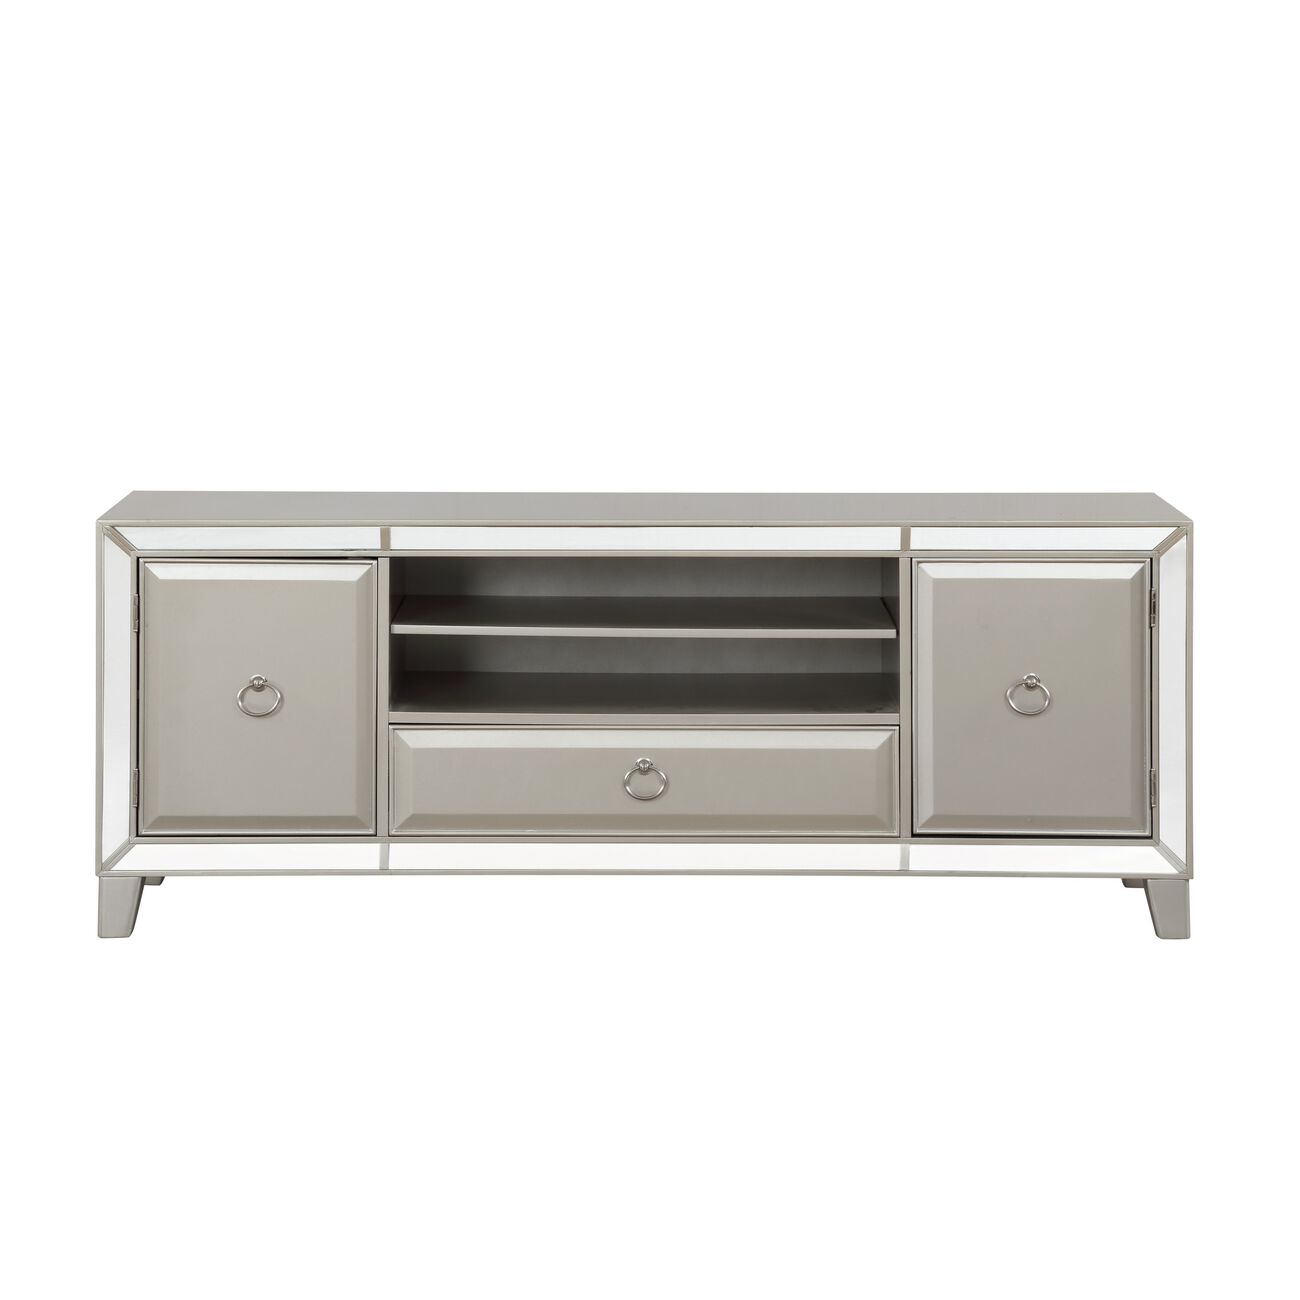 Contemporary Wooden TV Stand with Ring Pulls and Mirror Trim Inlay, Silver